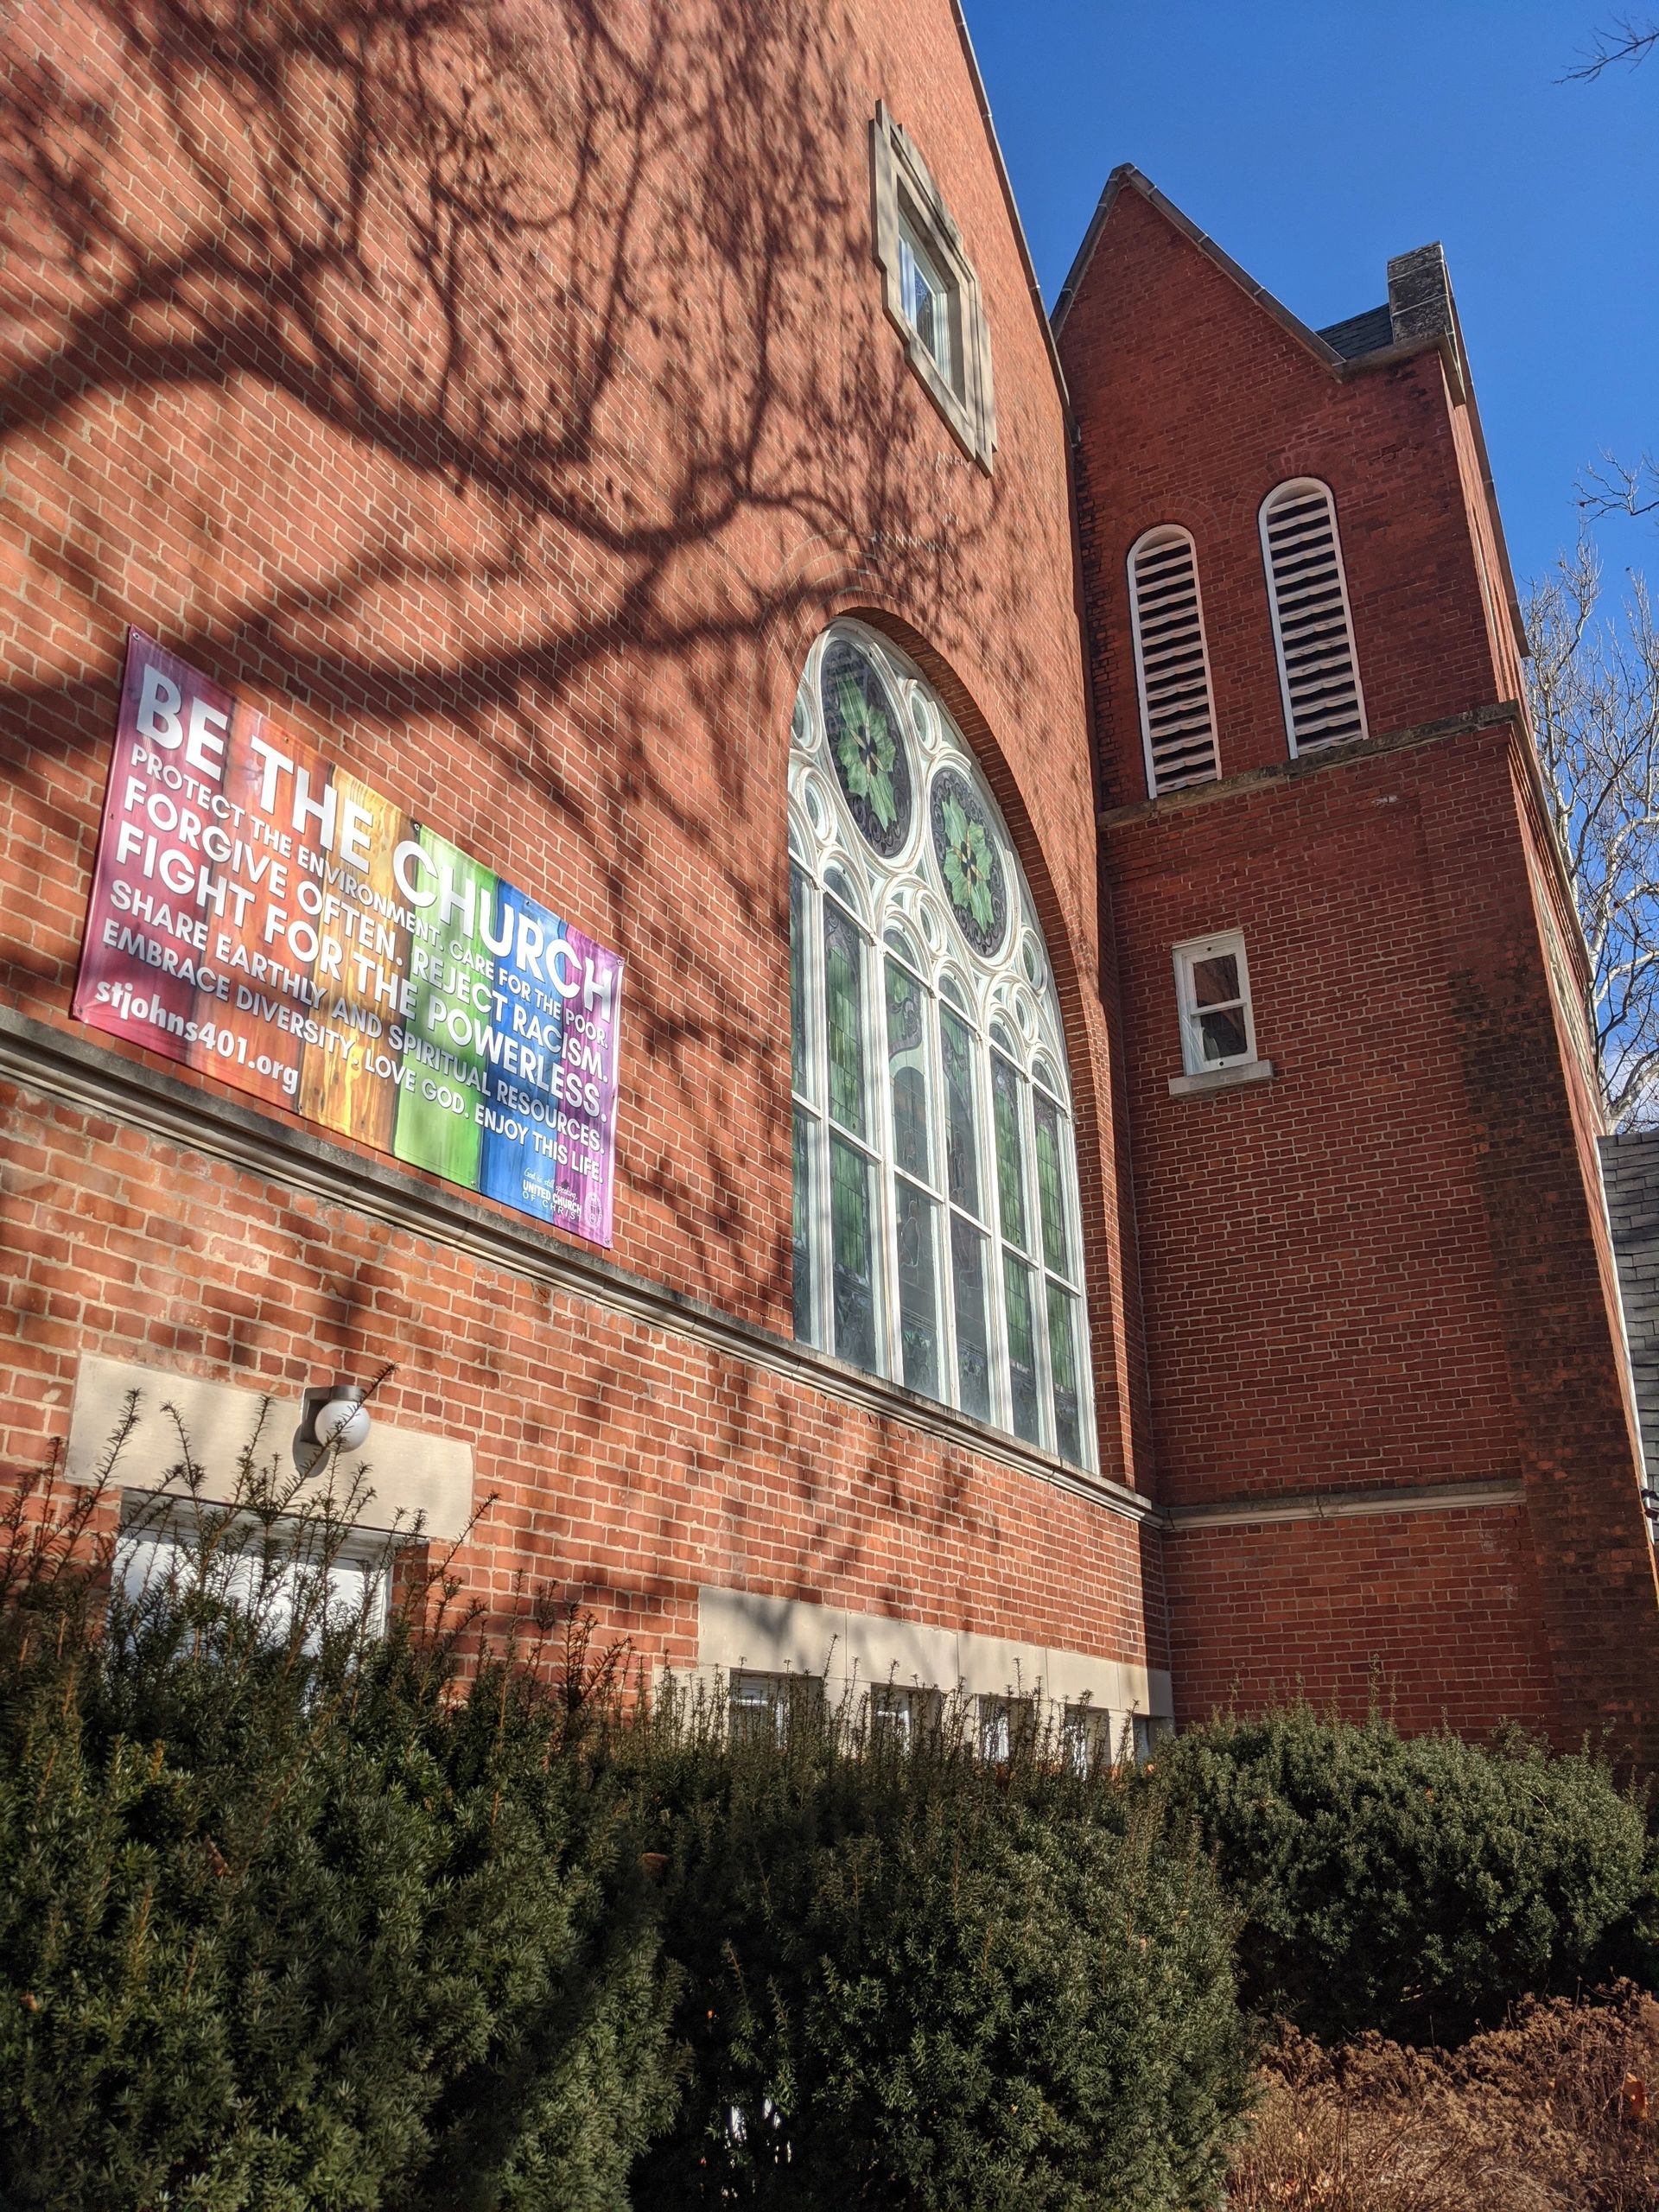 Front of church building with rainbow banner reading "Be The Church" and stained glass window.